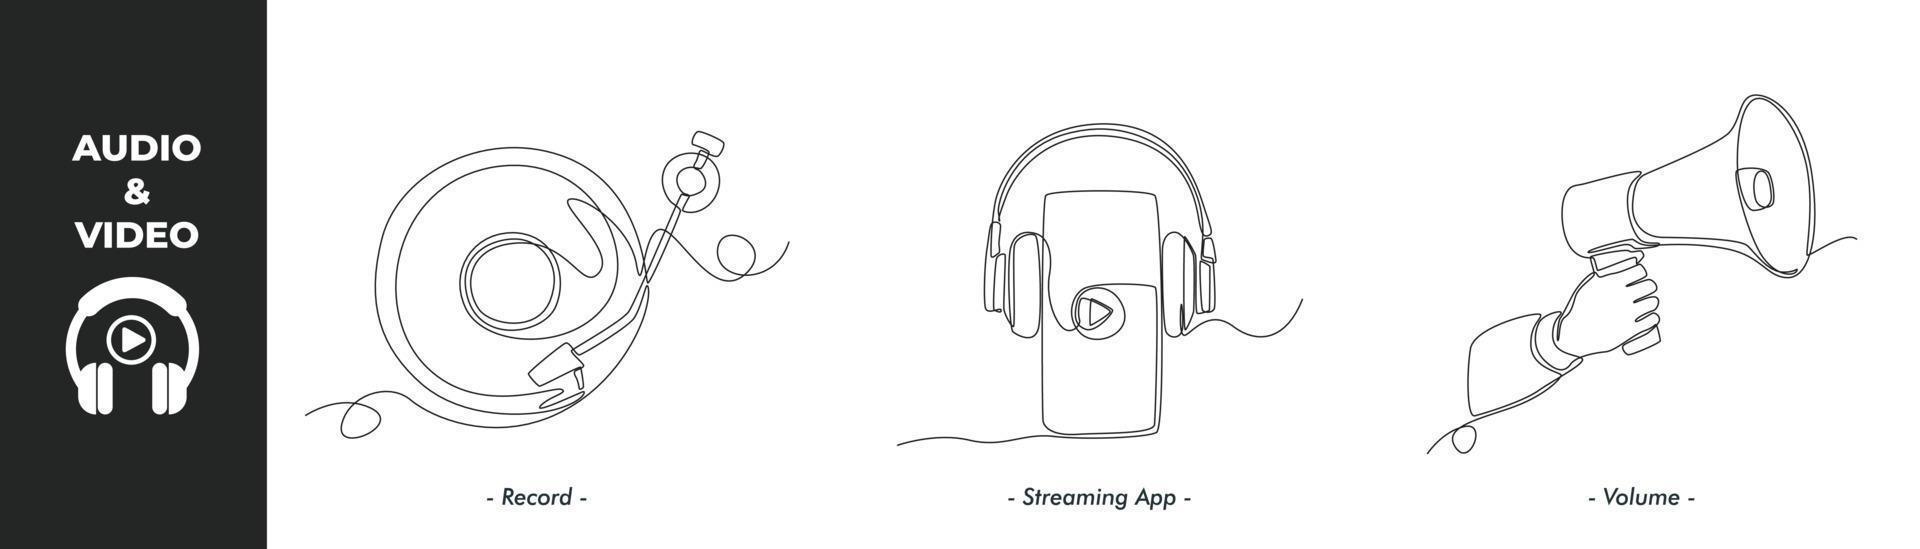 Continuous one line drawing winter audio and video concept set. Record, Streaming app and Volume icon. Single line draw design vector graphic illustration.